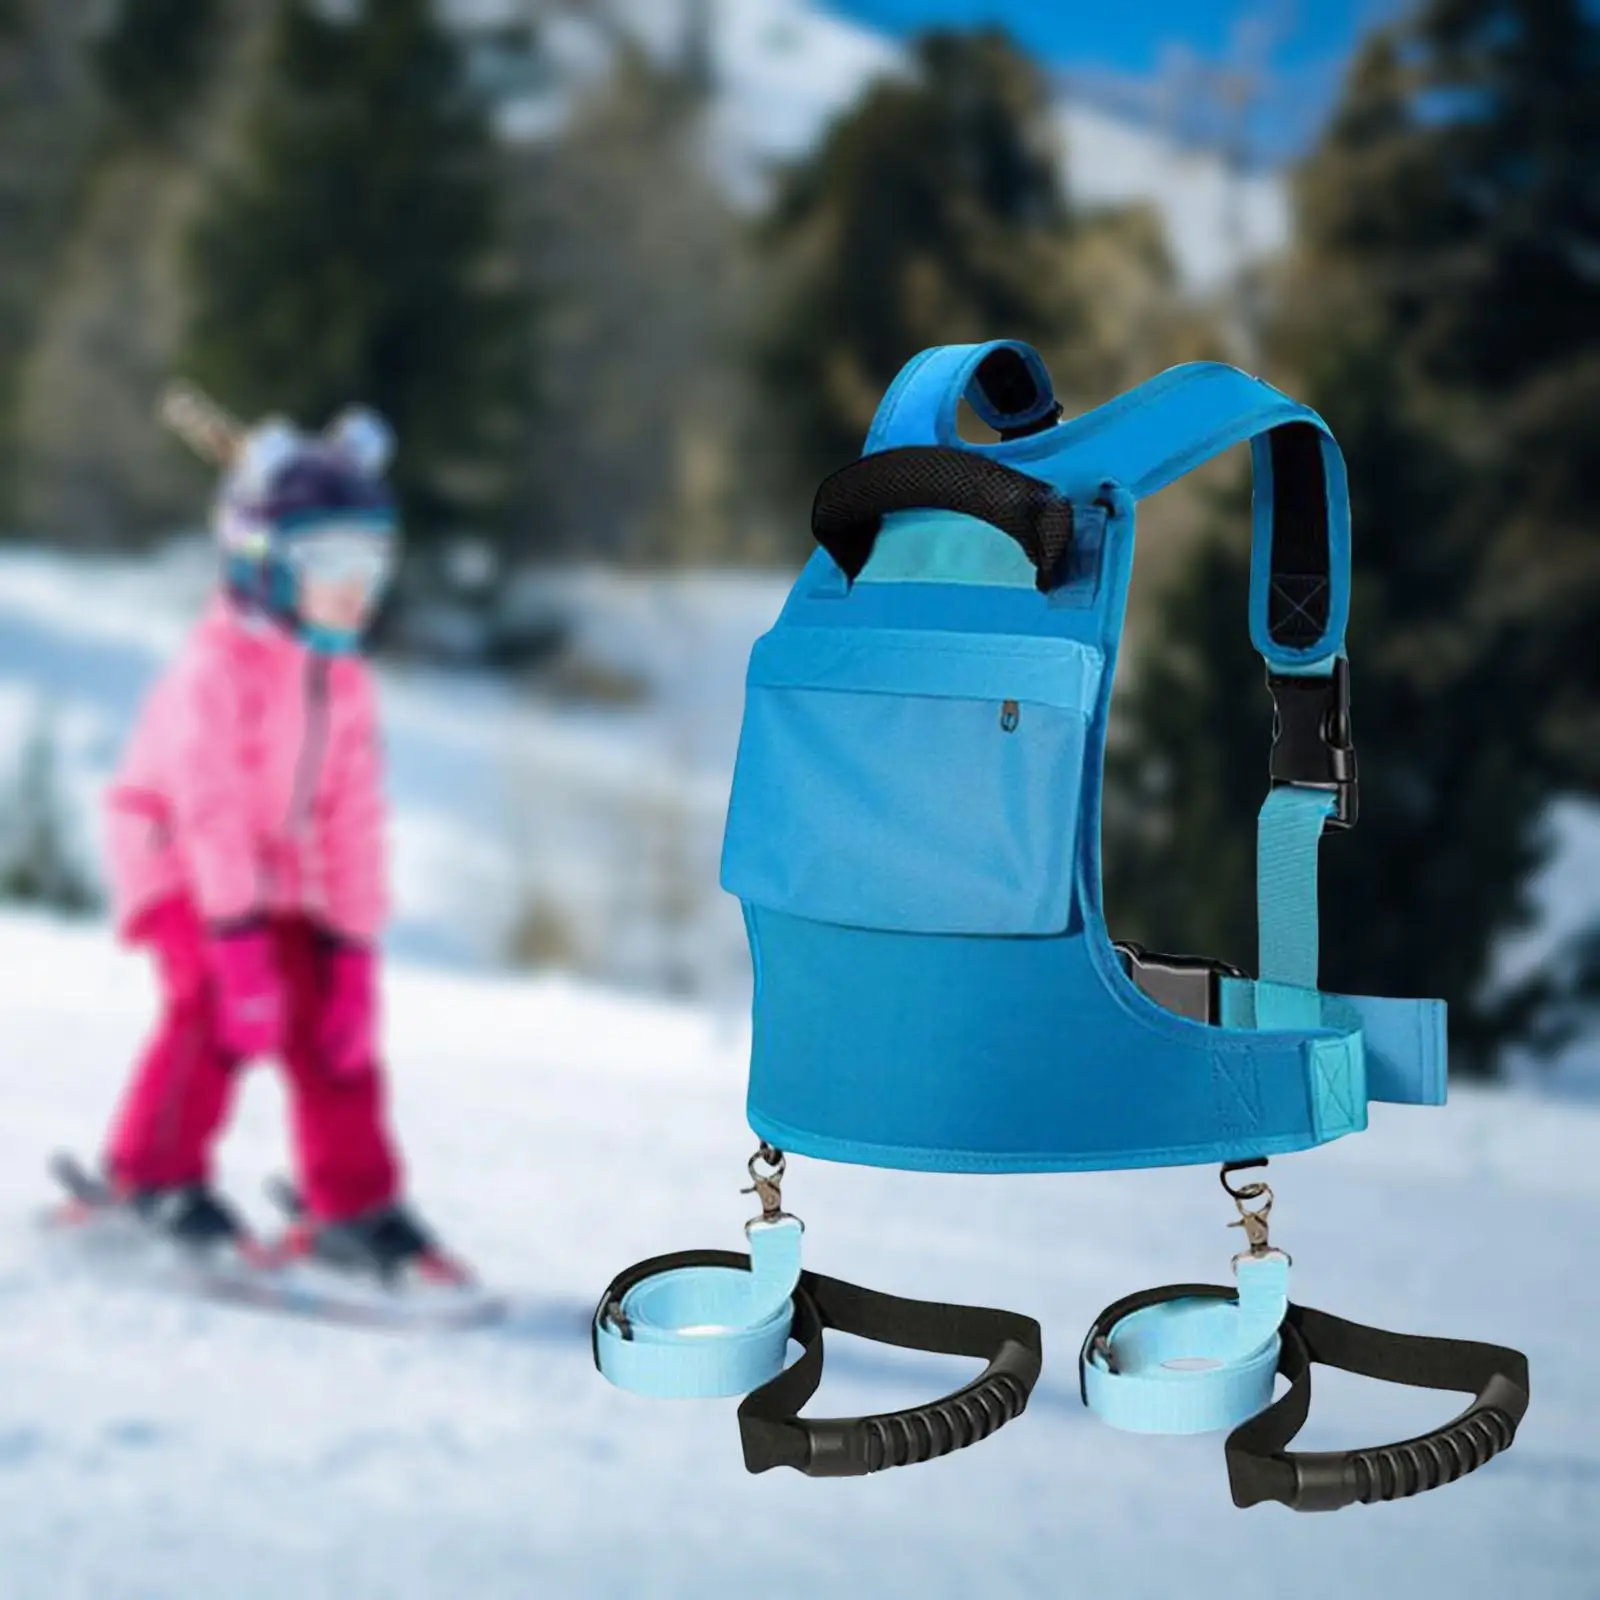 Kids Ski Harness with Handle Safety Shoulder Strap Ski Shoulder Harness for for 2-8 Years Old Girls Boys Skiing Winter Sports